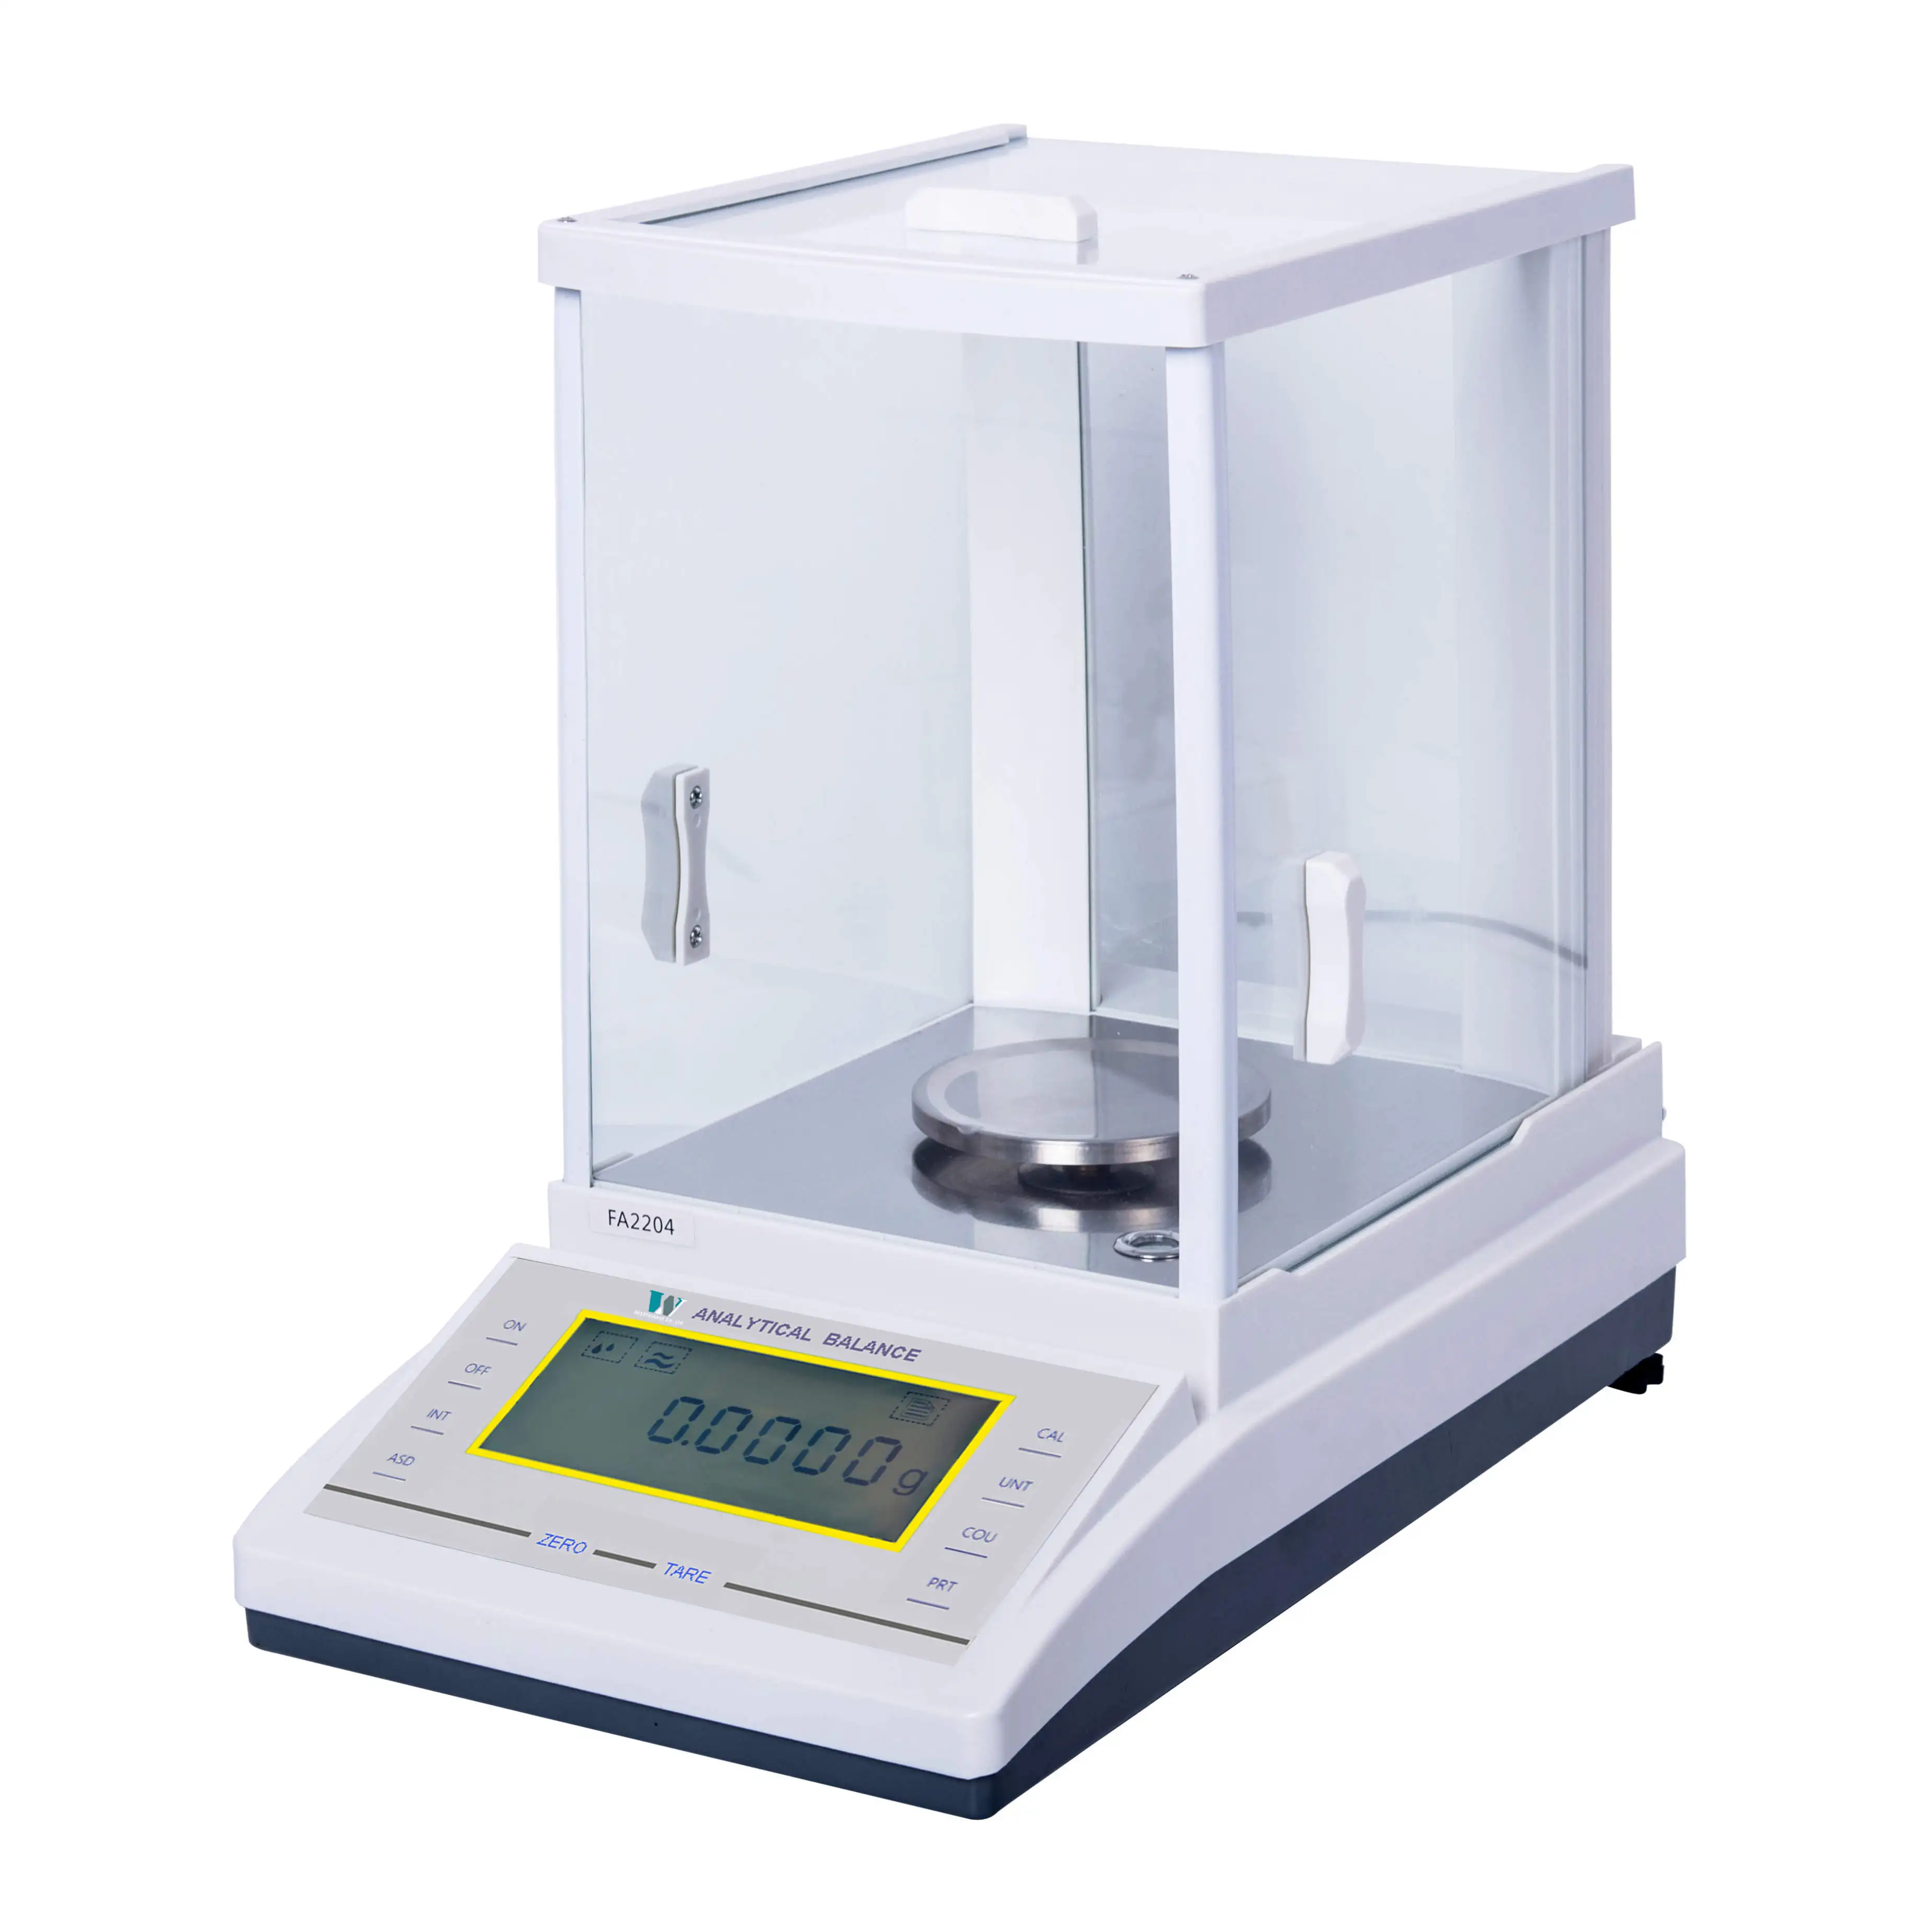 

FREE SHIPPING 200g digital 0.0001g weighing laboratory analytical 100g 0.1mg precision electronic balance